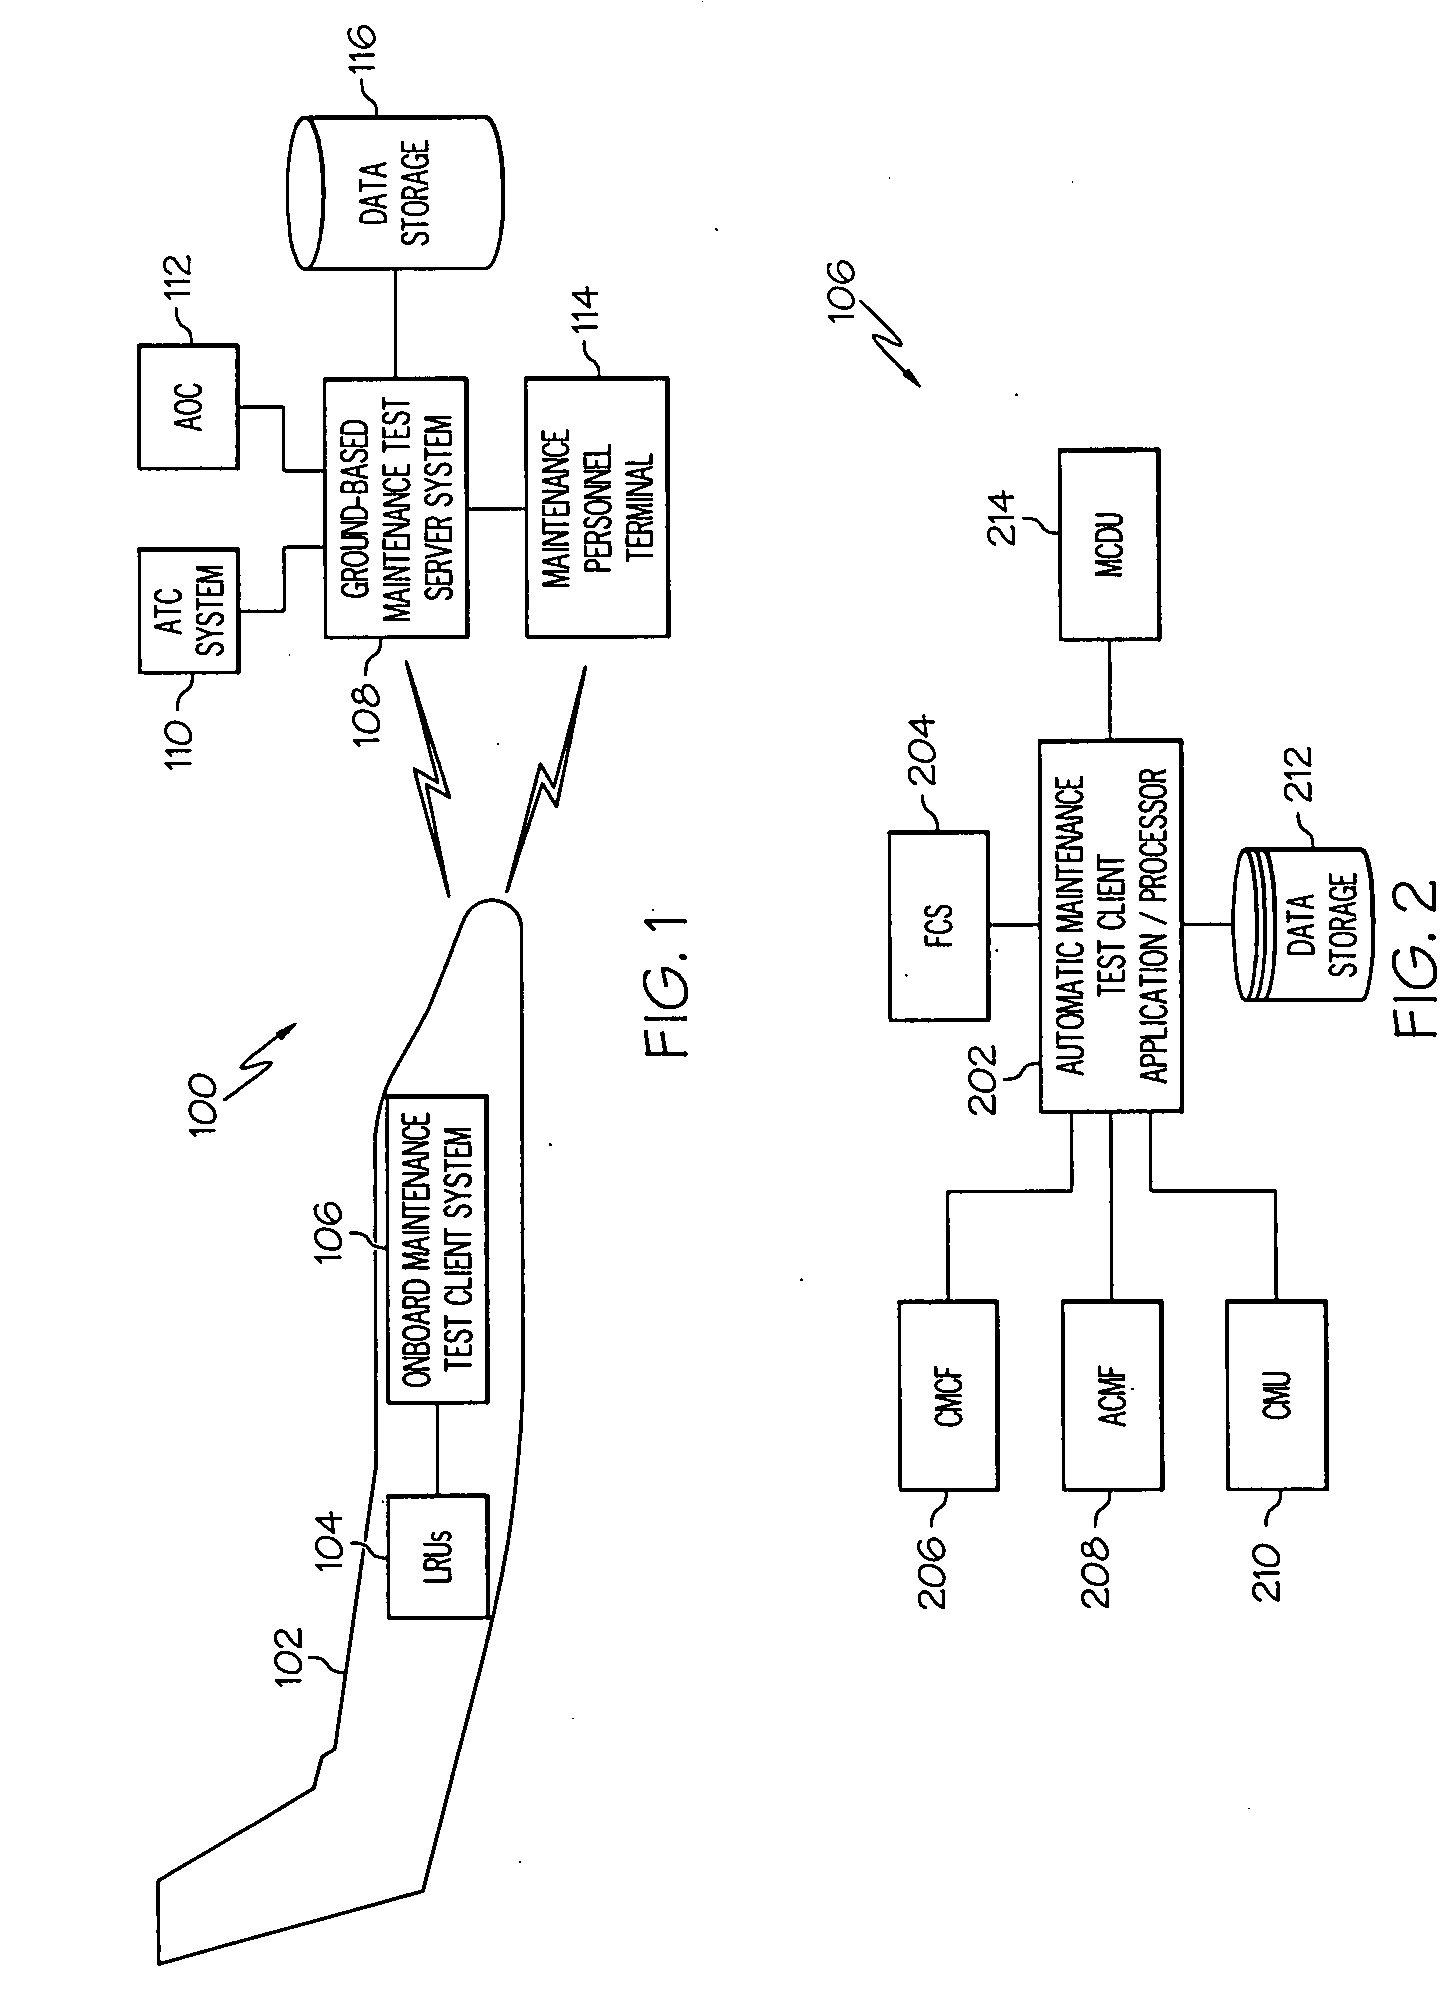 System and method of automated fault analysis and diagnostic testing of an aircraft